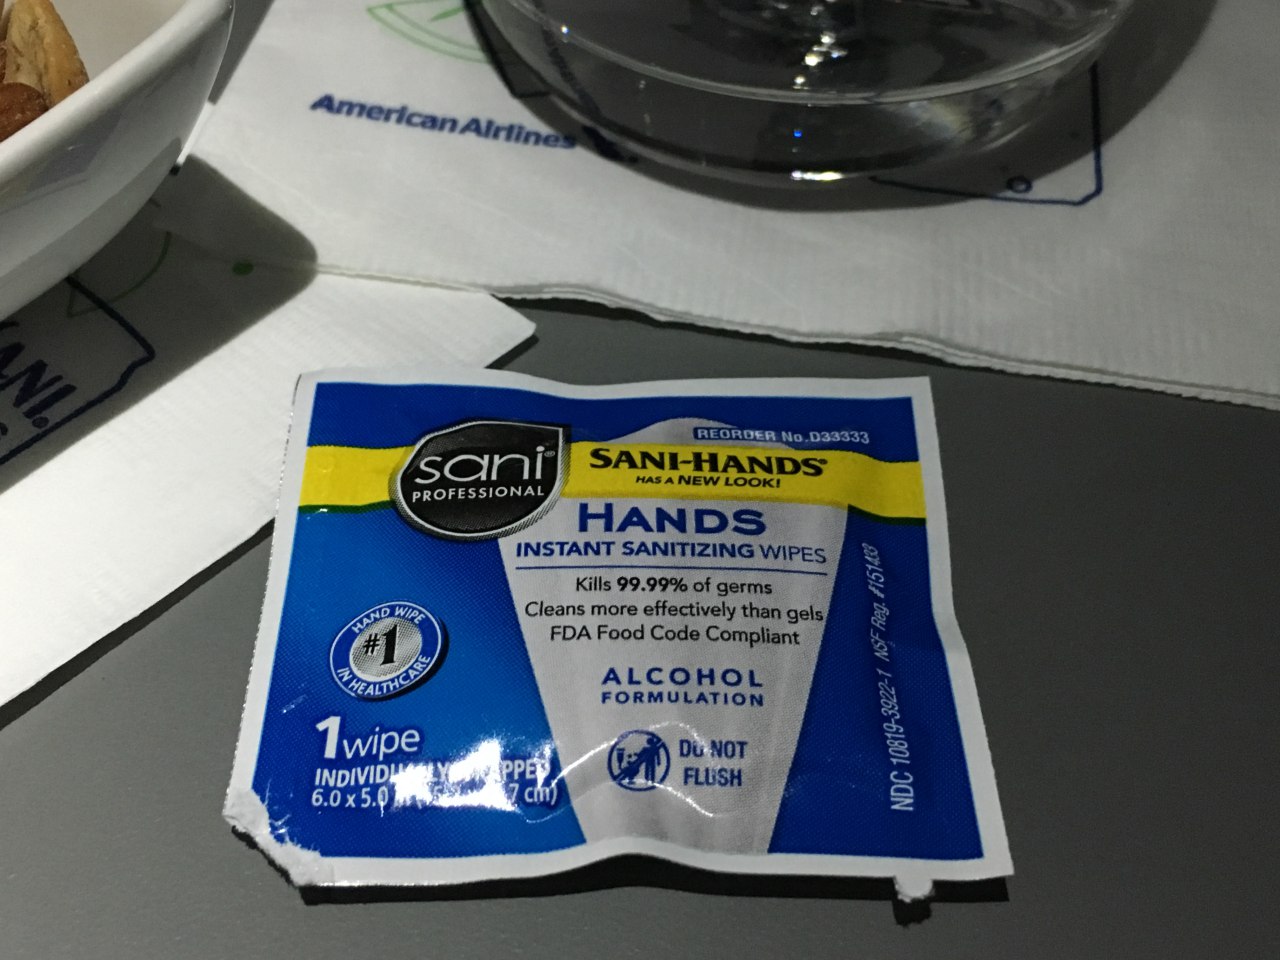 American Airlines E175 First Class Review-Hand Wipe